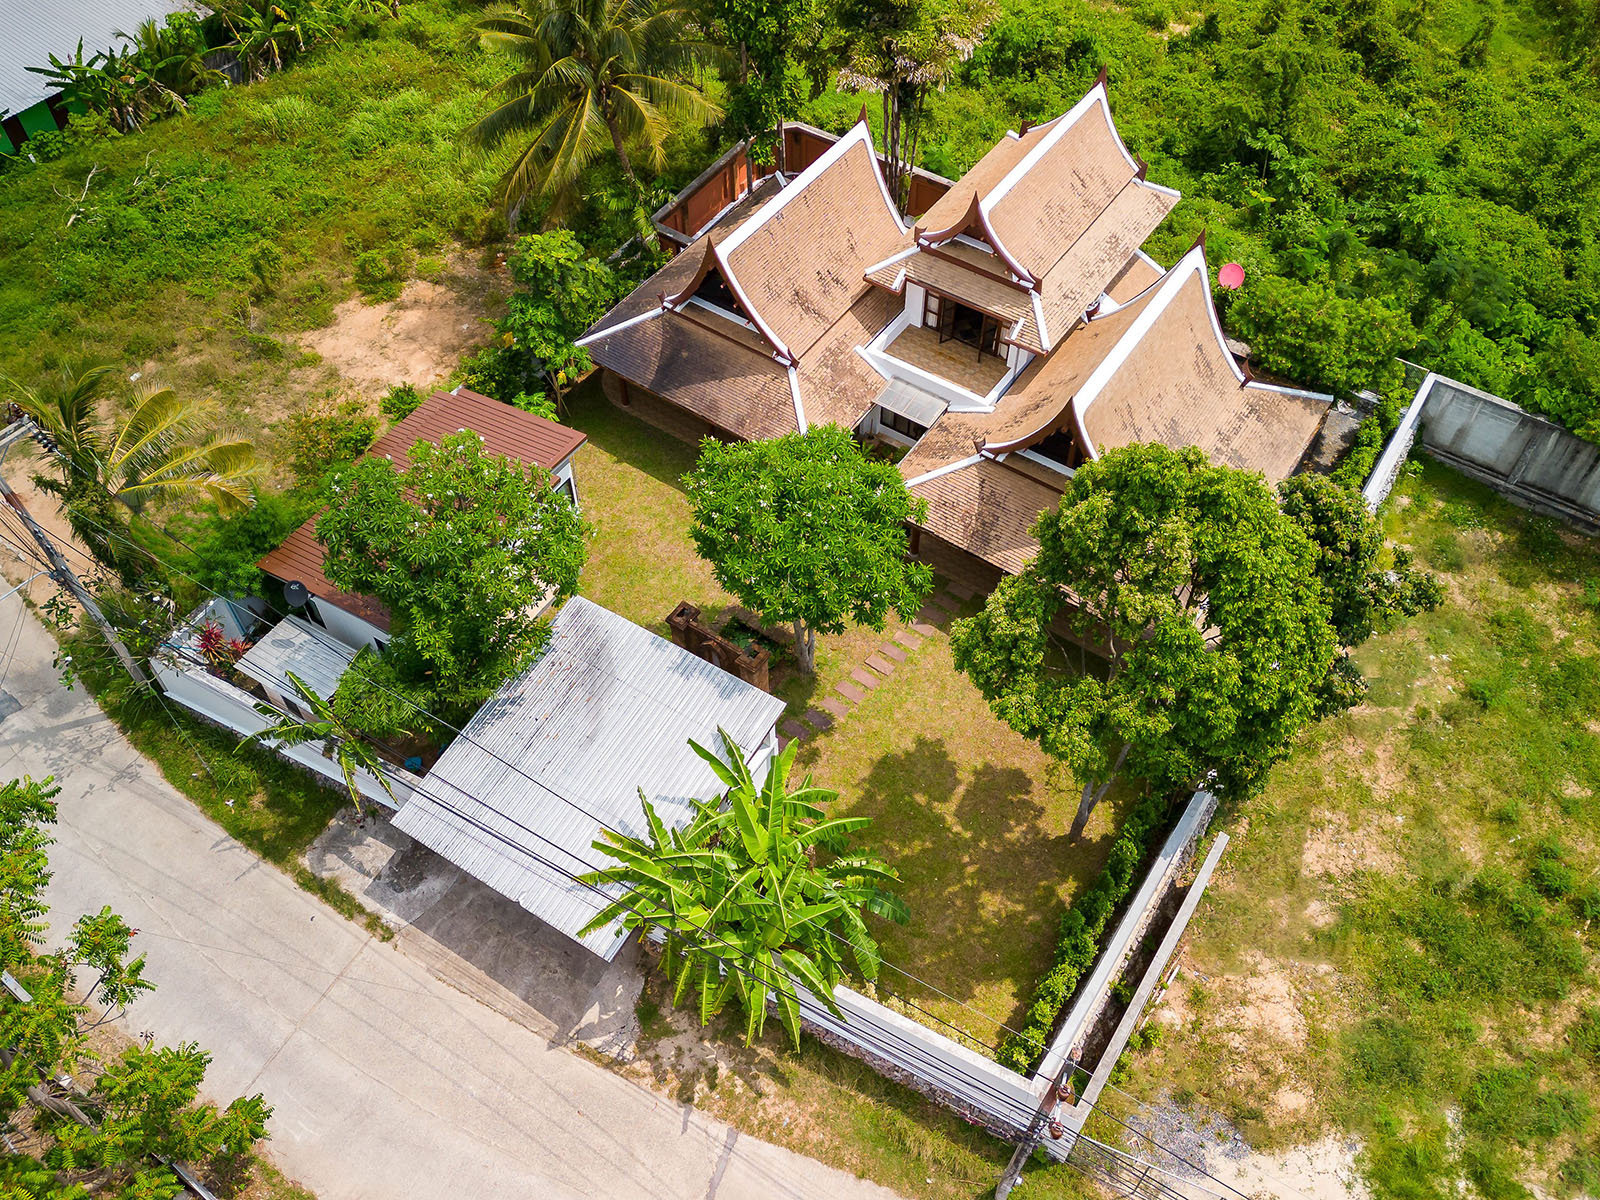 Beach Access 2+1 Bedroom Thai Styled House in Lamai for sale: Beach Access 2+1 Bedroom Thai Styled House in Lamai for sale